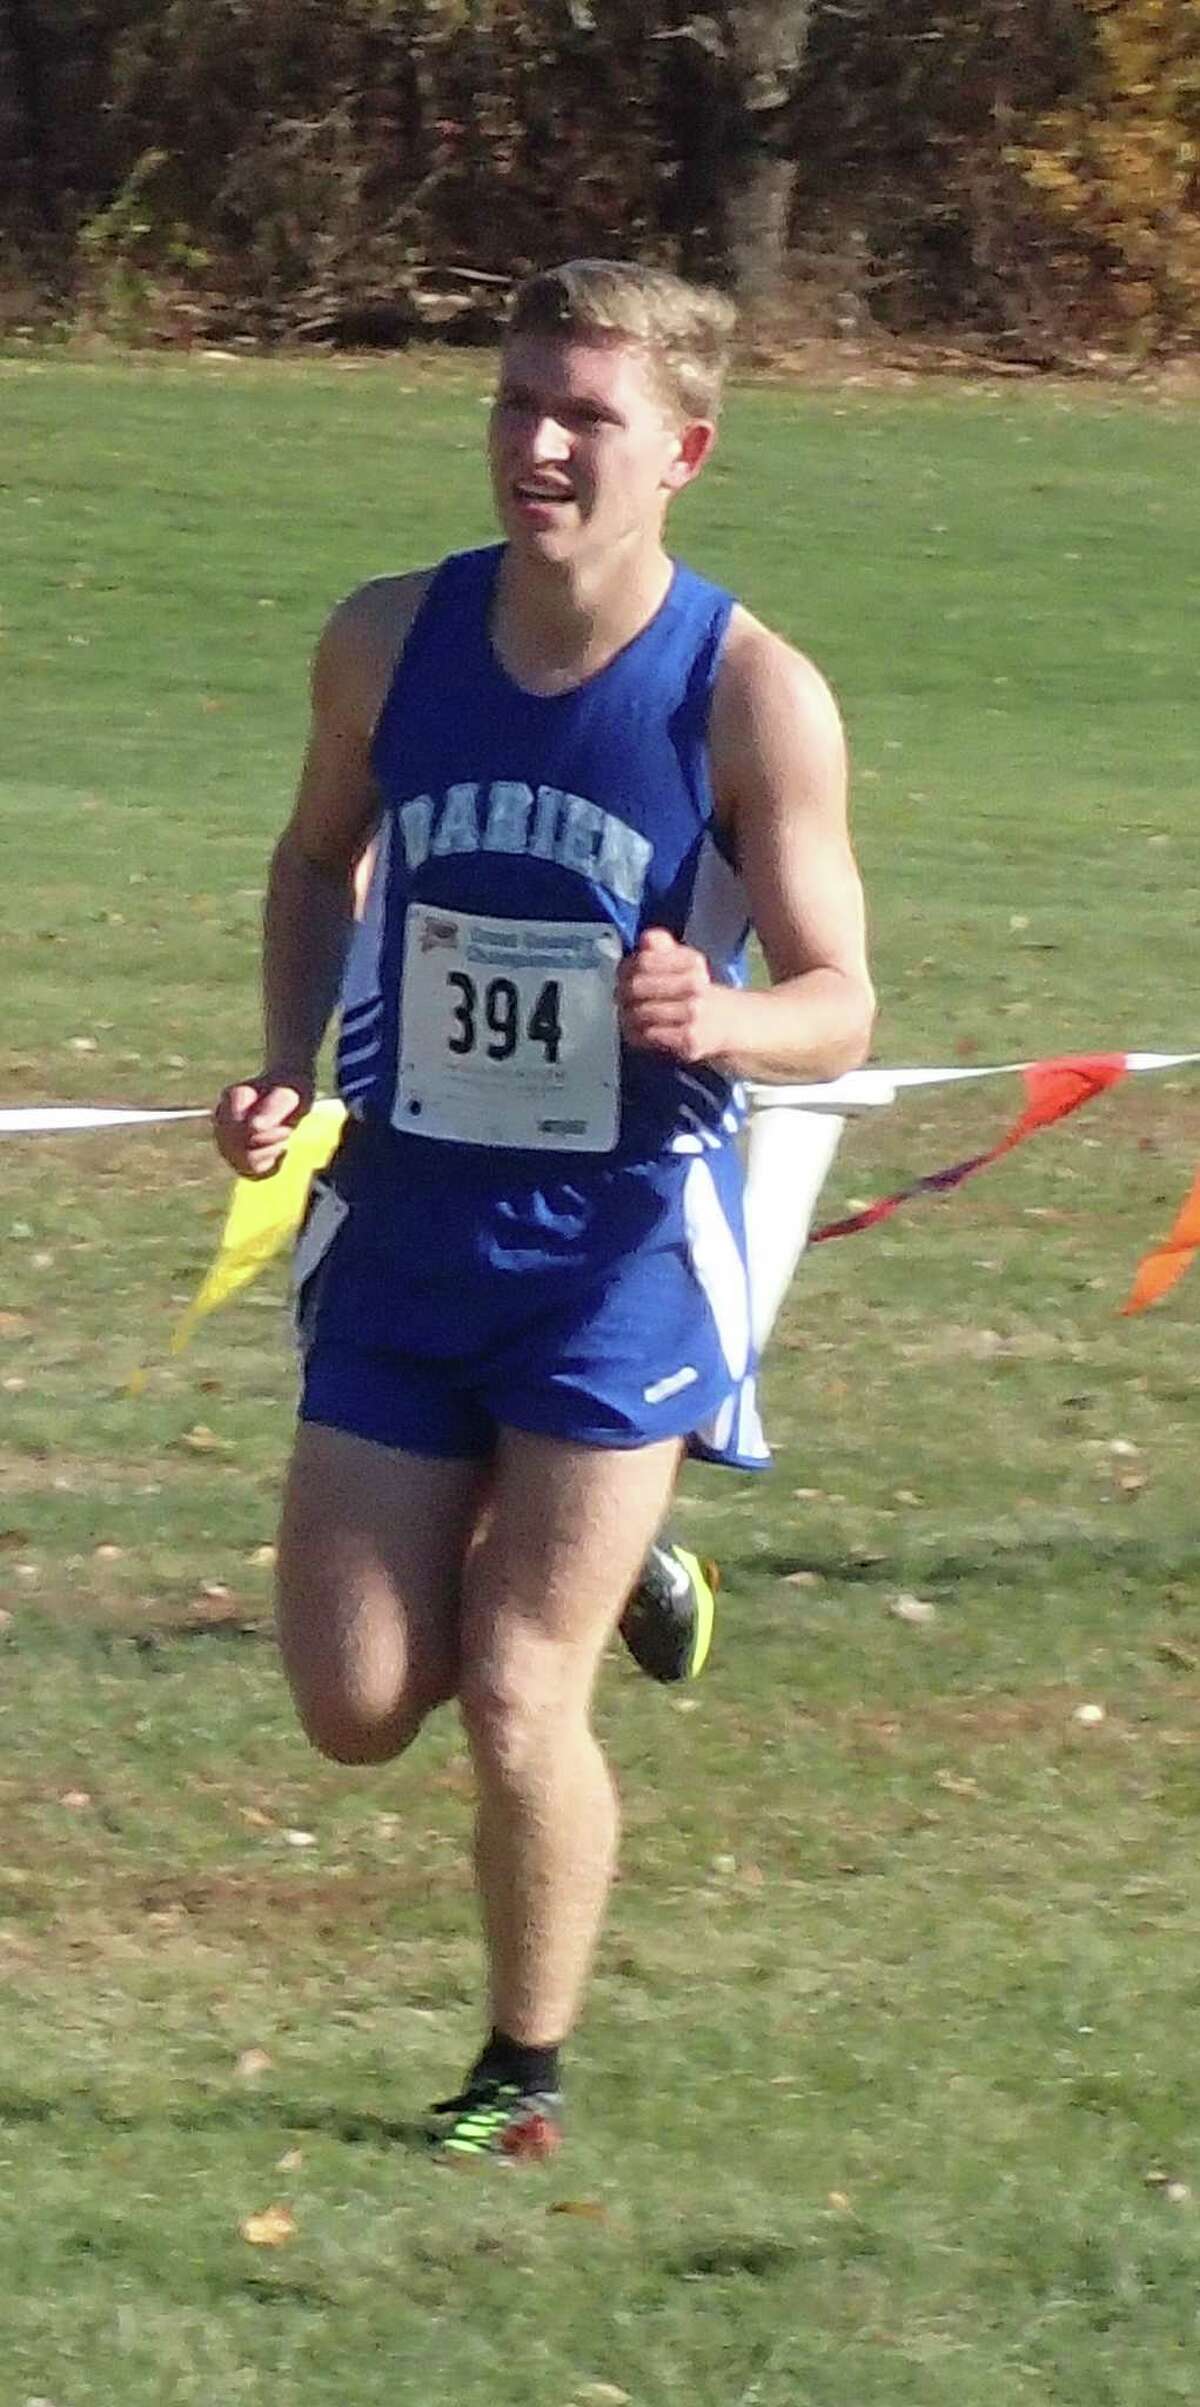 Armstrong Noonan of Darien placed third in the Class L state cross country championship race at Wickham Park on Oct. 31, 2015.